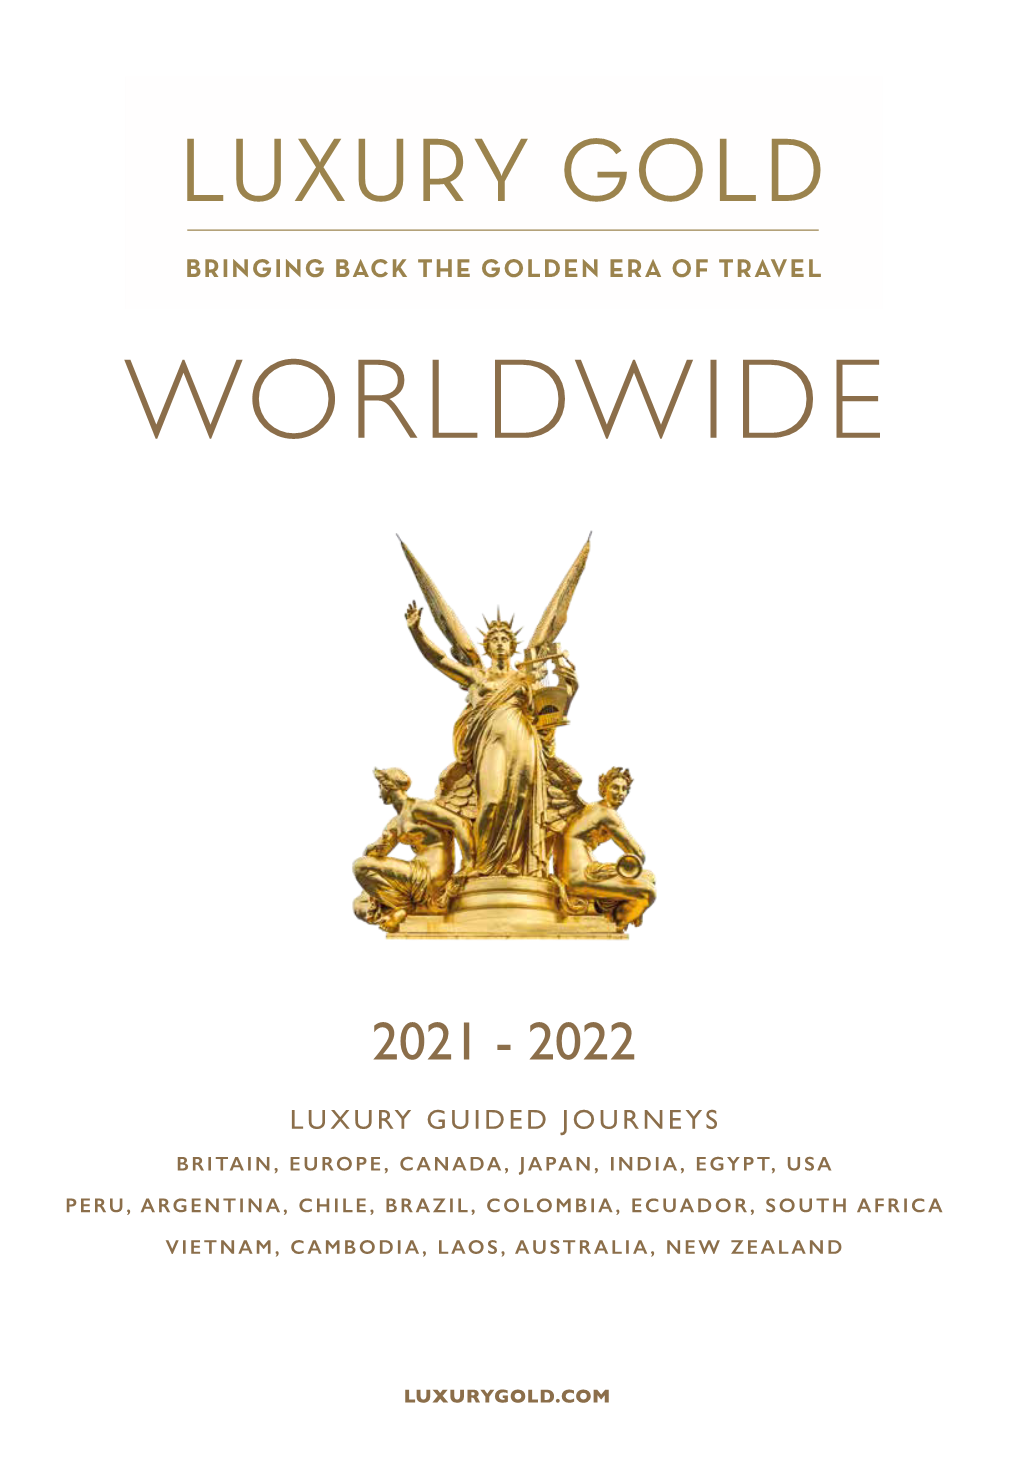 WORLDWIDE ” Luxury Gold Is Proud to Be Part of the Travel Corporation (TTC), a Family-Owned and Family-Run Company Celebrating More Than 100 Years in Business